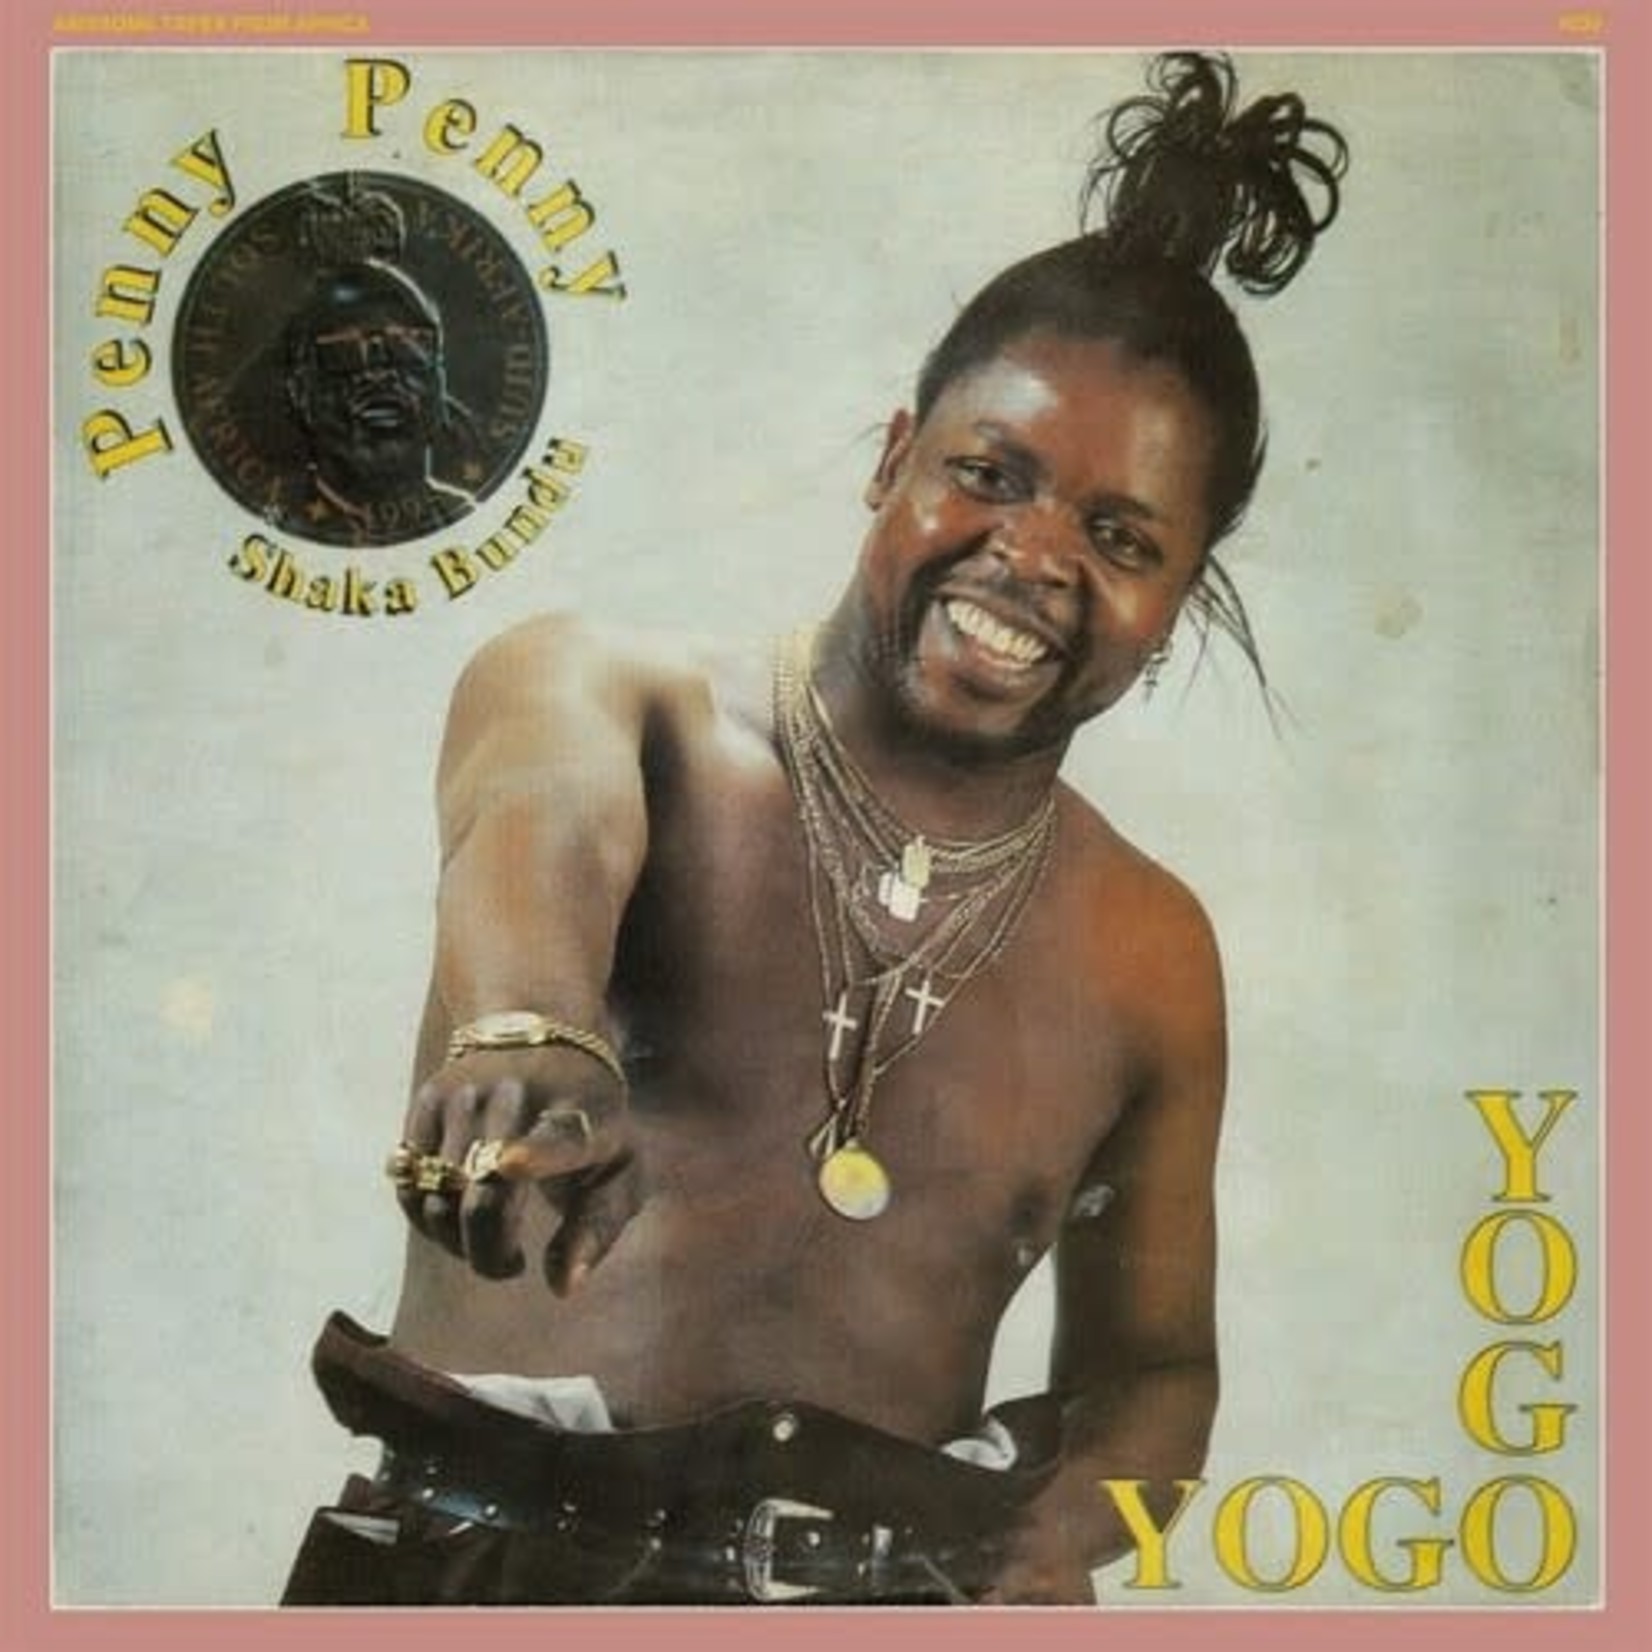 Awesome Tapes From Africa Penny Penny - Yogo Yogo (LP)